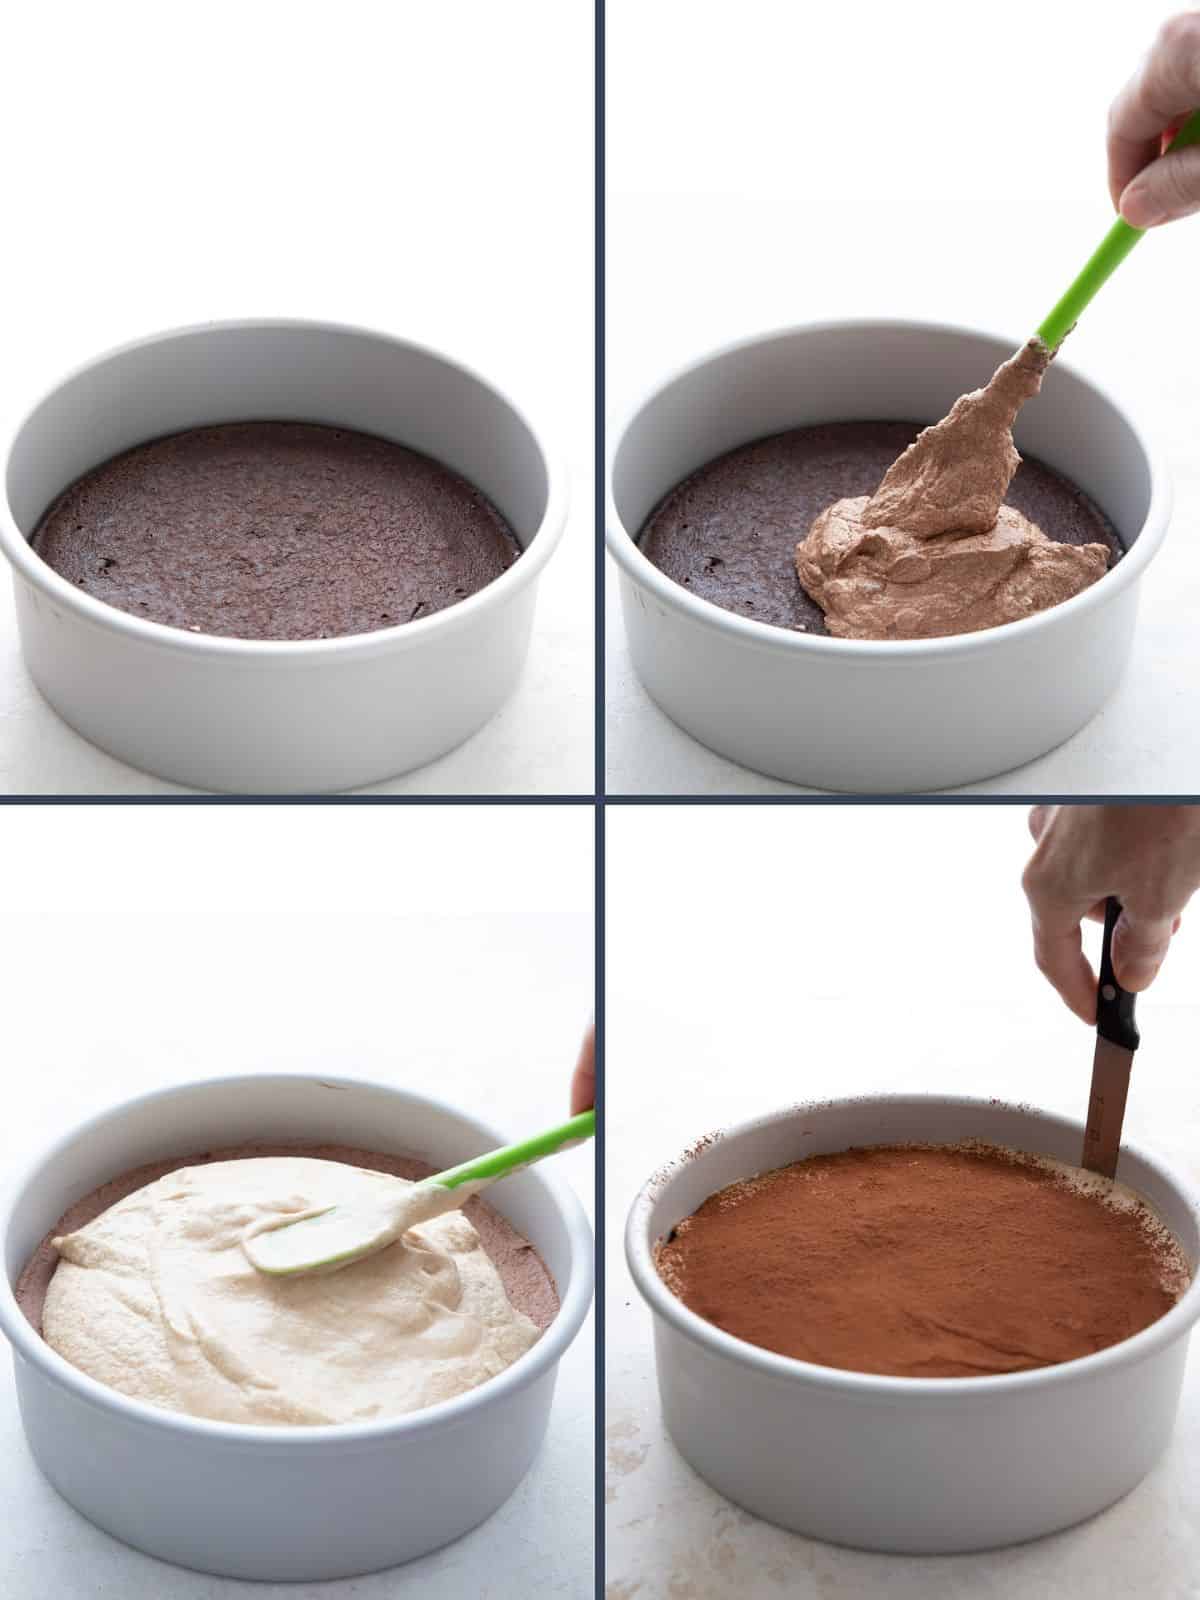 Four images showing the steps for making keto espresso mousse cake.